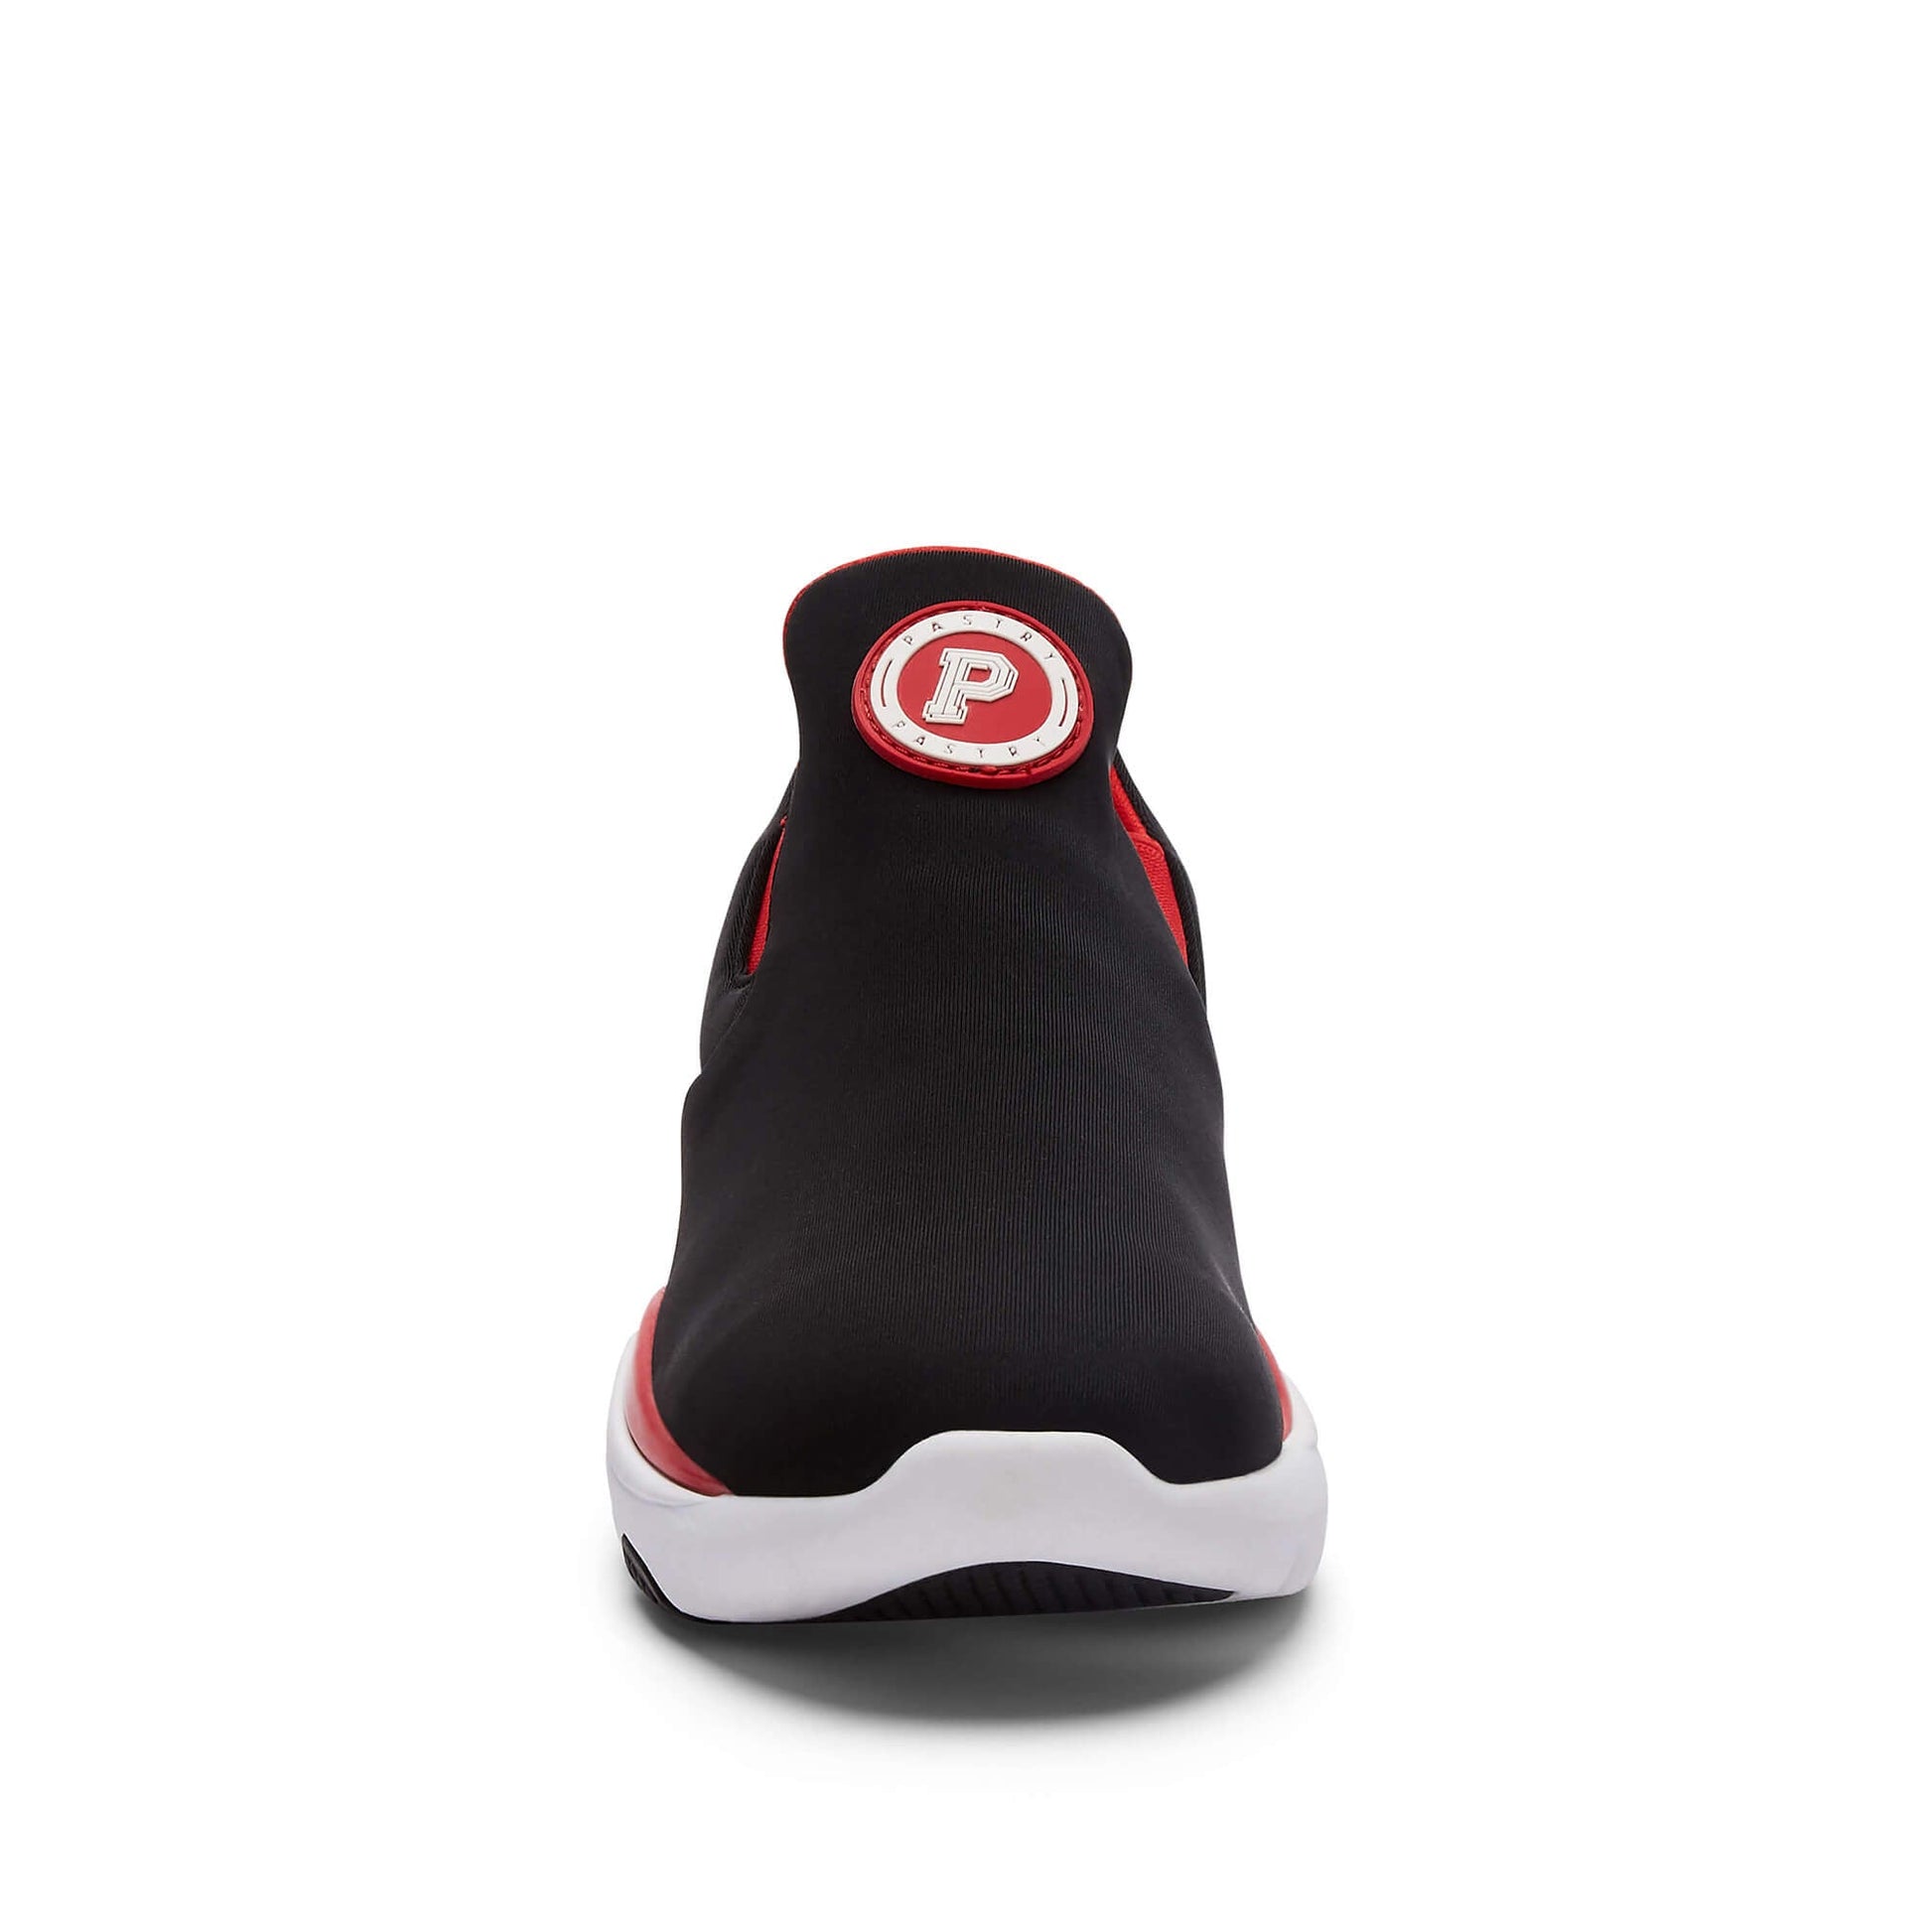 Pastry Phoenix Adult Womens Sneaker in Black/Red front view